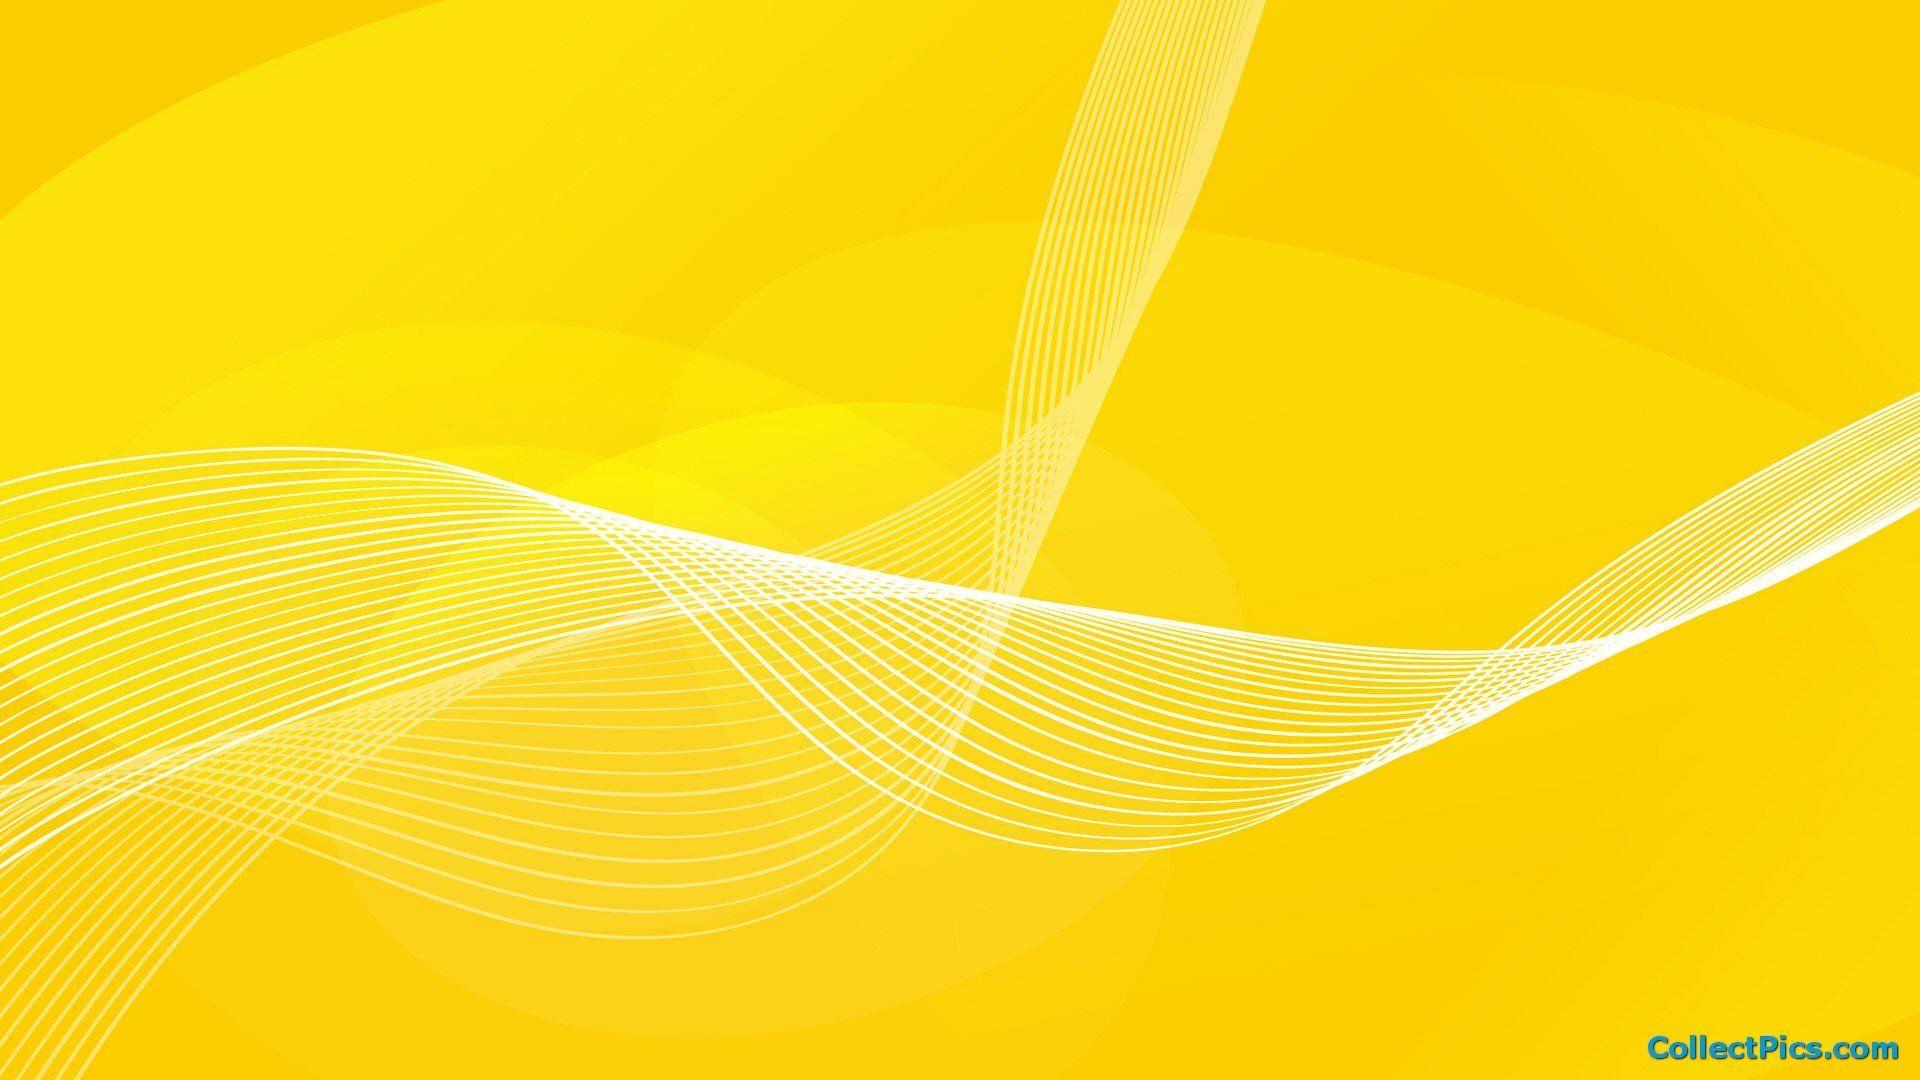 Yellow abstract rays wallpaper Royalty Free Vector Image